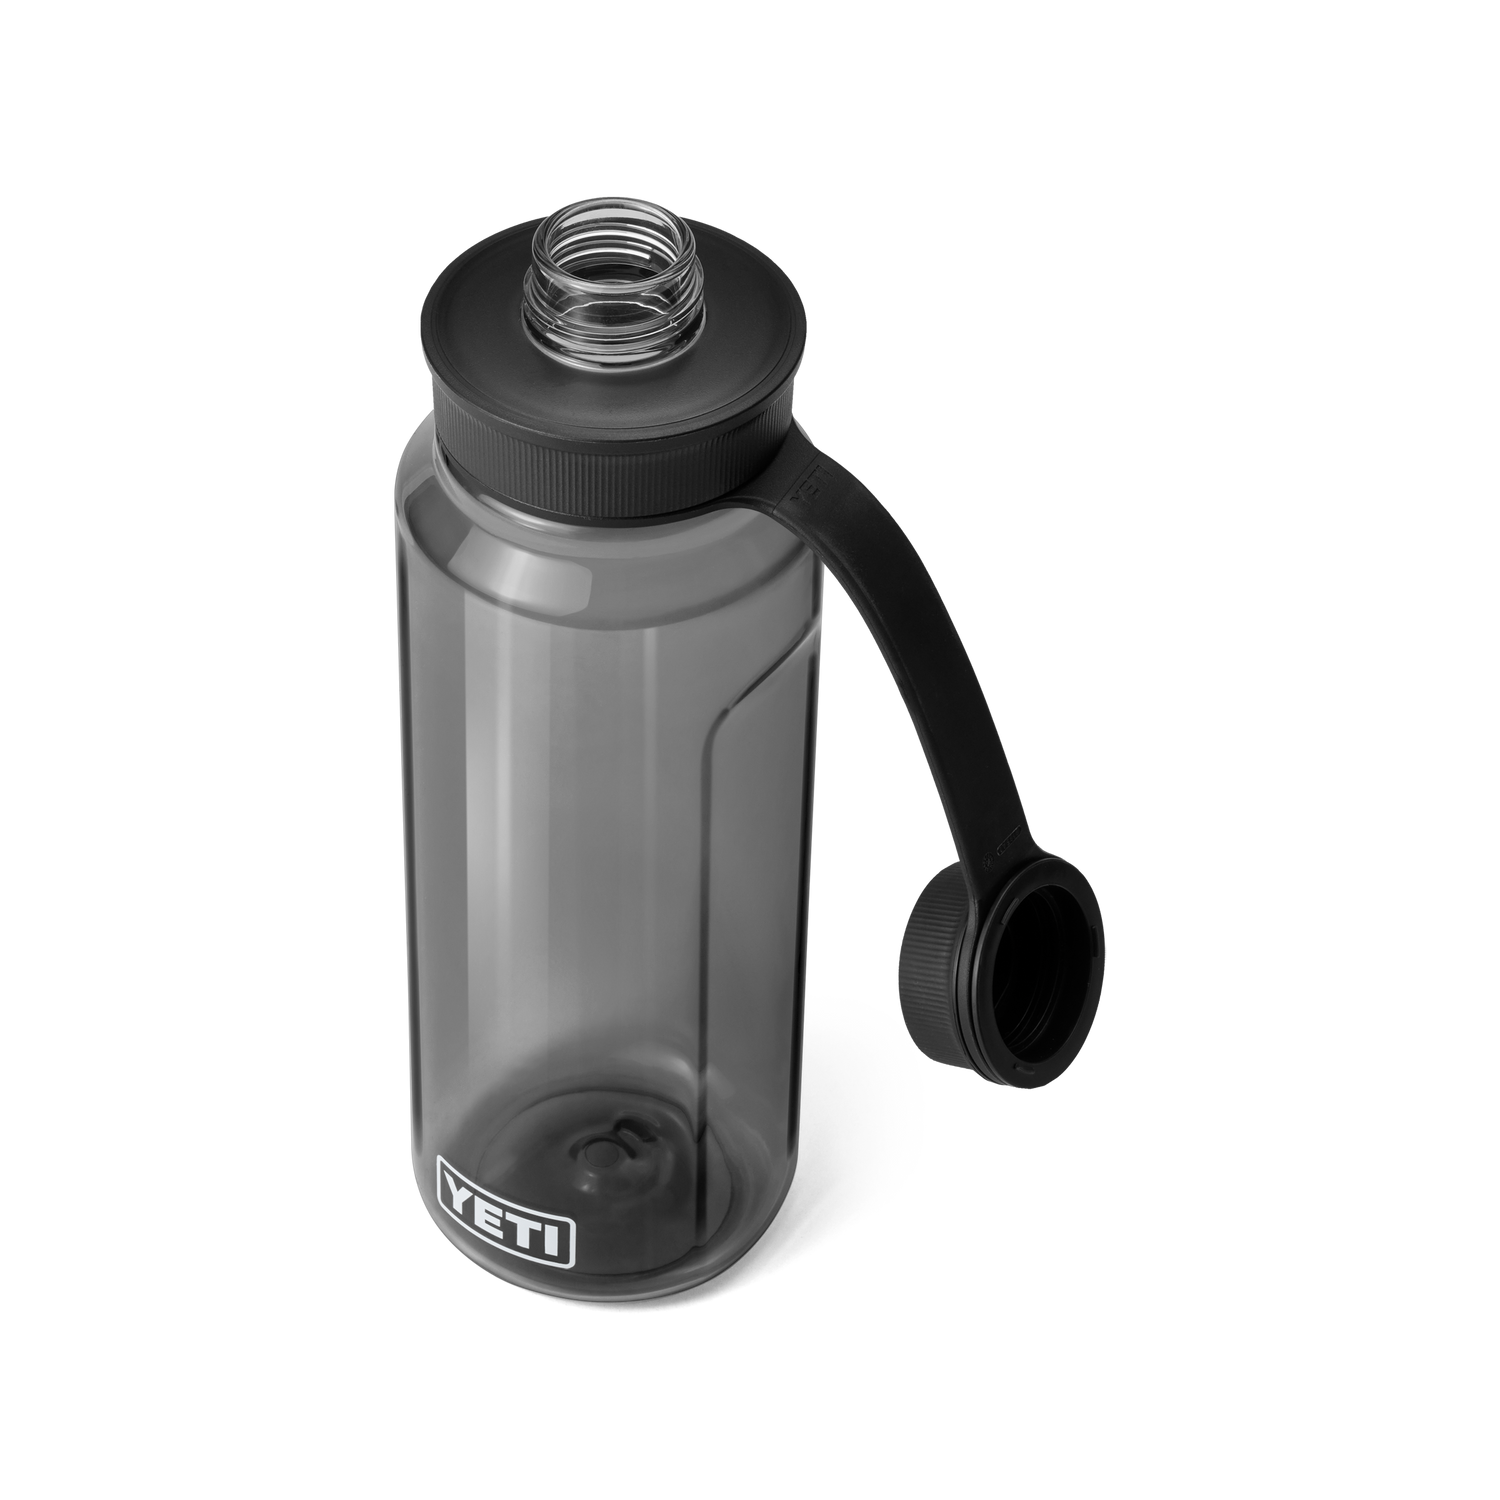 site_studio_Drinkware_Yonder_Tether_Accs_1L_Charcoal_3qtr_Open_0818_Primary_B_2400x2400.png